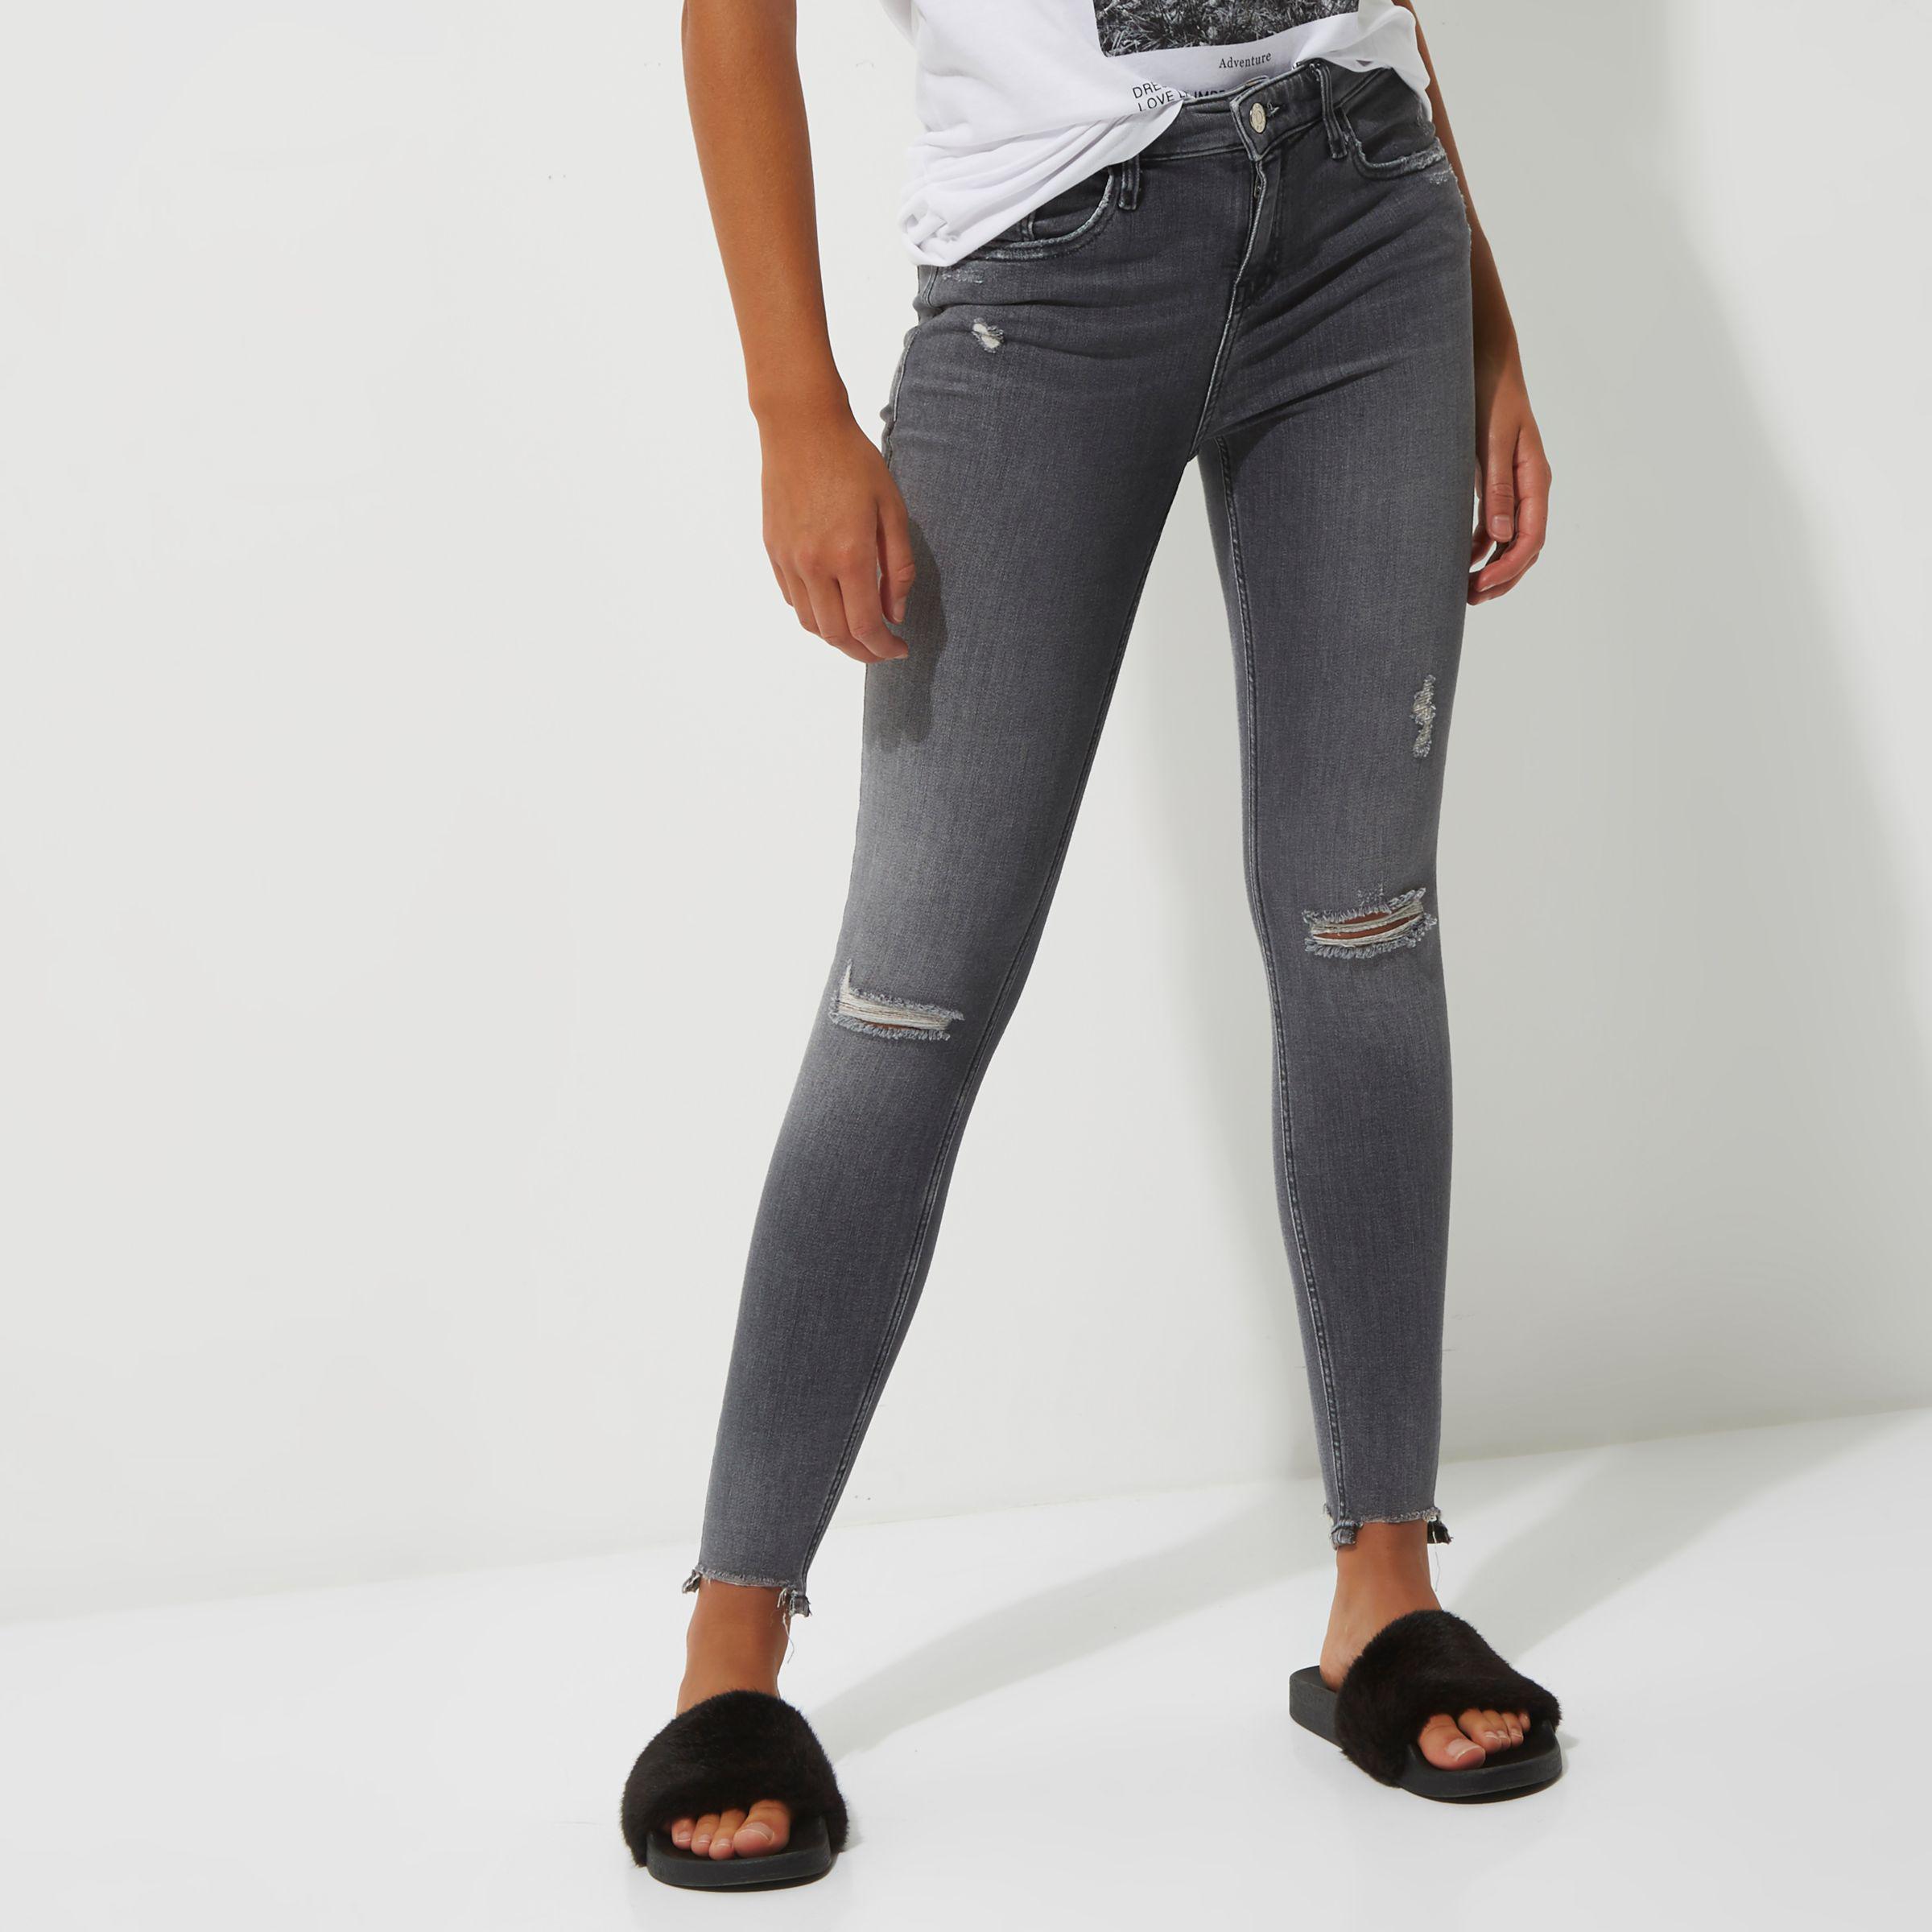 River Island Denim Grey Ripped Amelie Super Skinny Jeans in Gray - Lyst